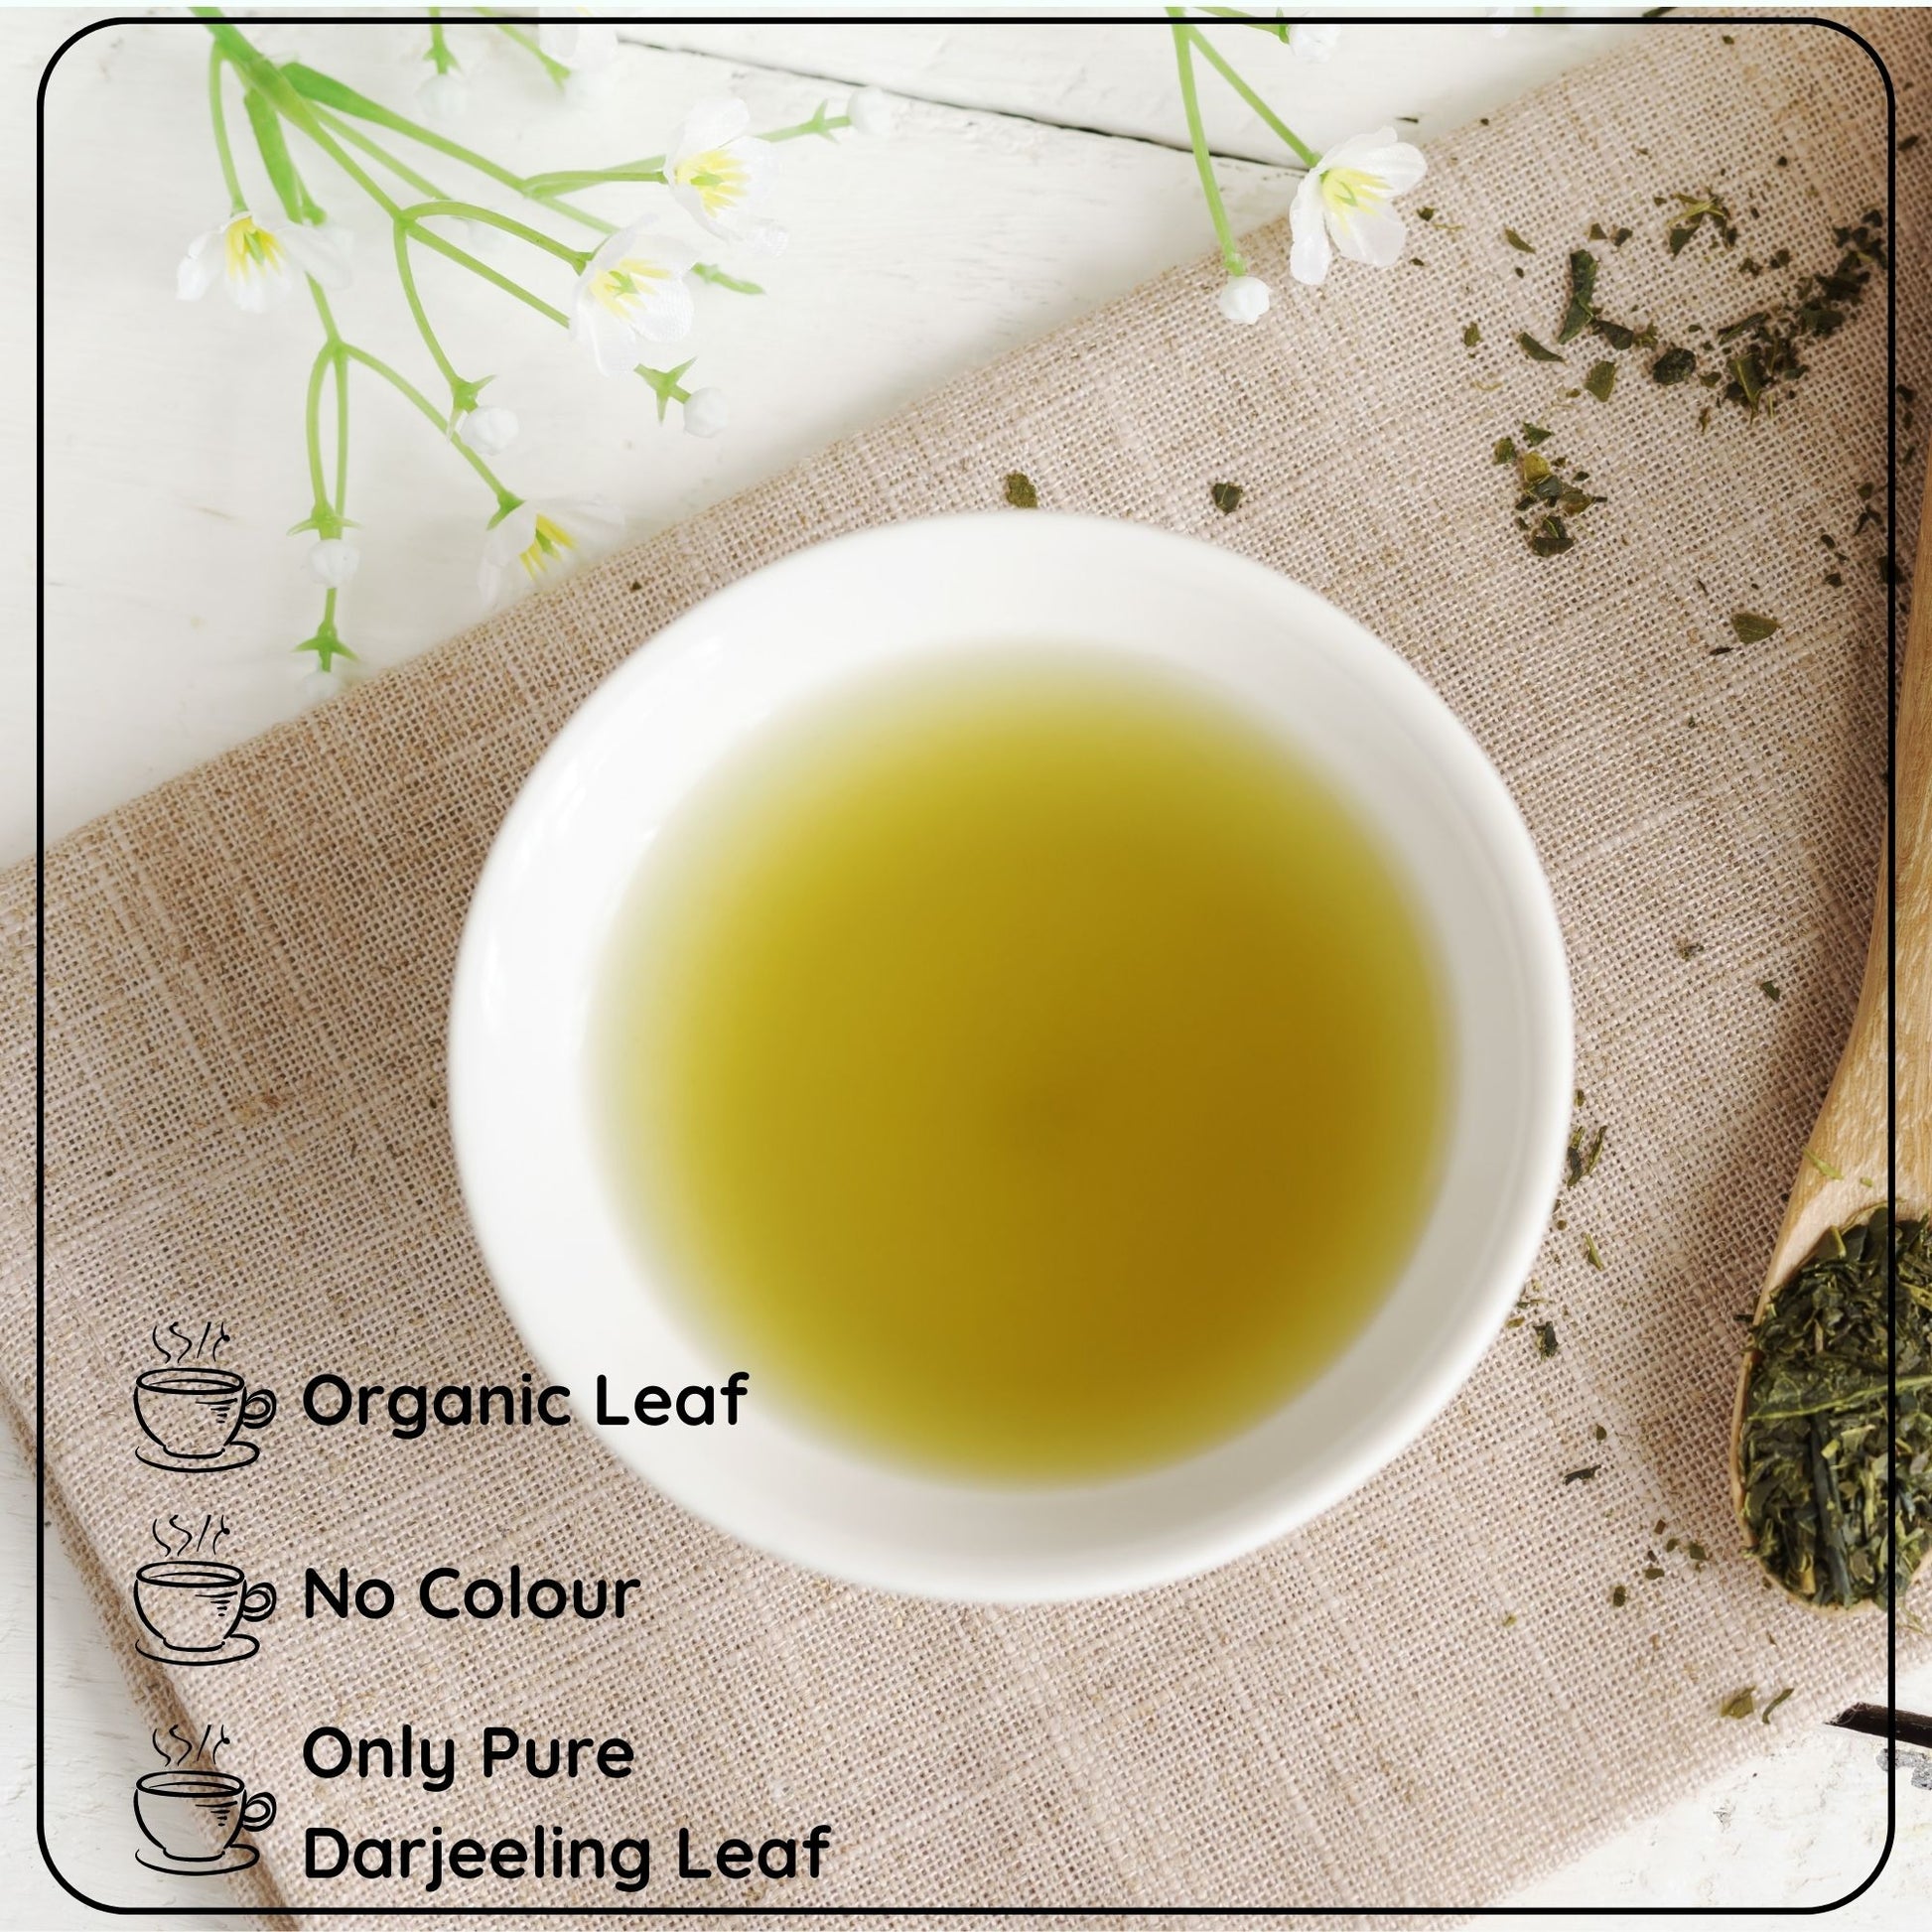 ANTI-AGEING Green Leaf - A Natural Anti-Aging Solution for Healthy and Glowing Skin - Radhikas Fine Teas and Whatnots